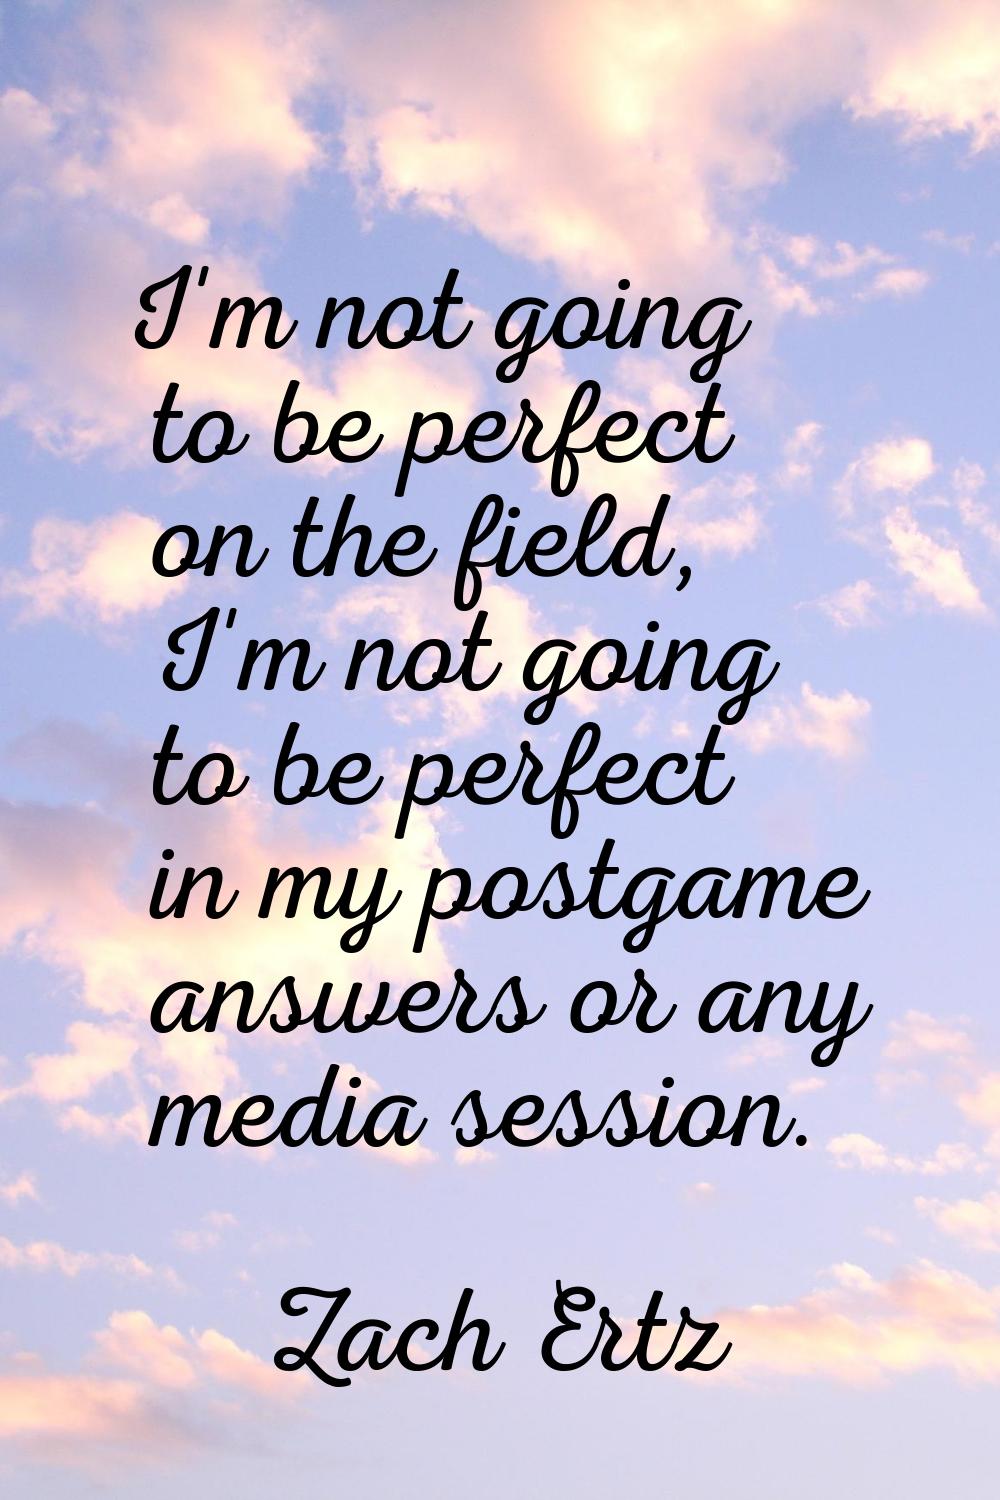 I'm not going to be perfect on the field, I'm not going to be perfect in my postgame answers or any